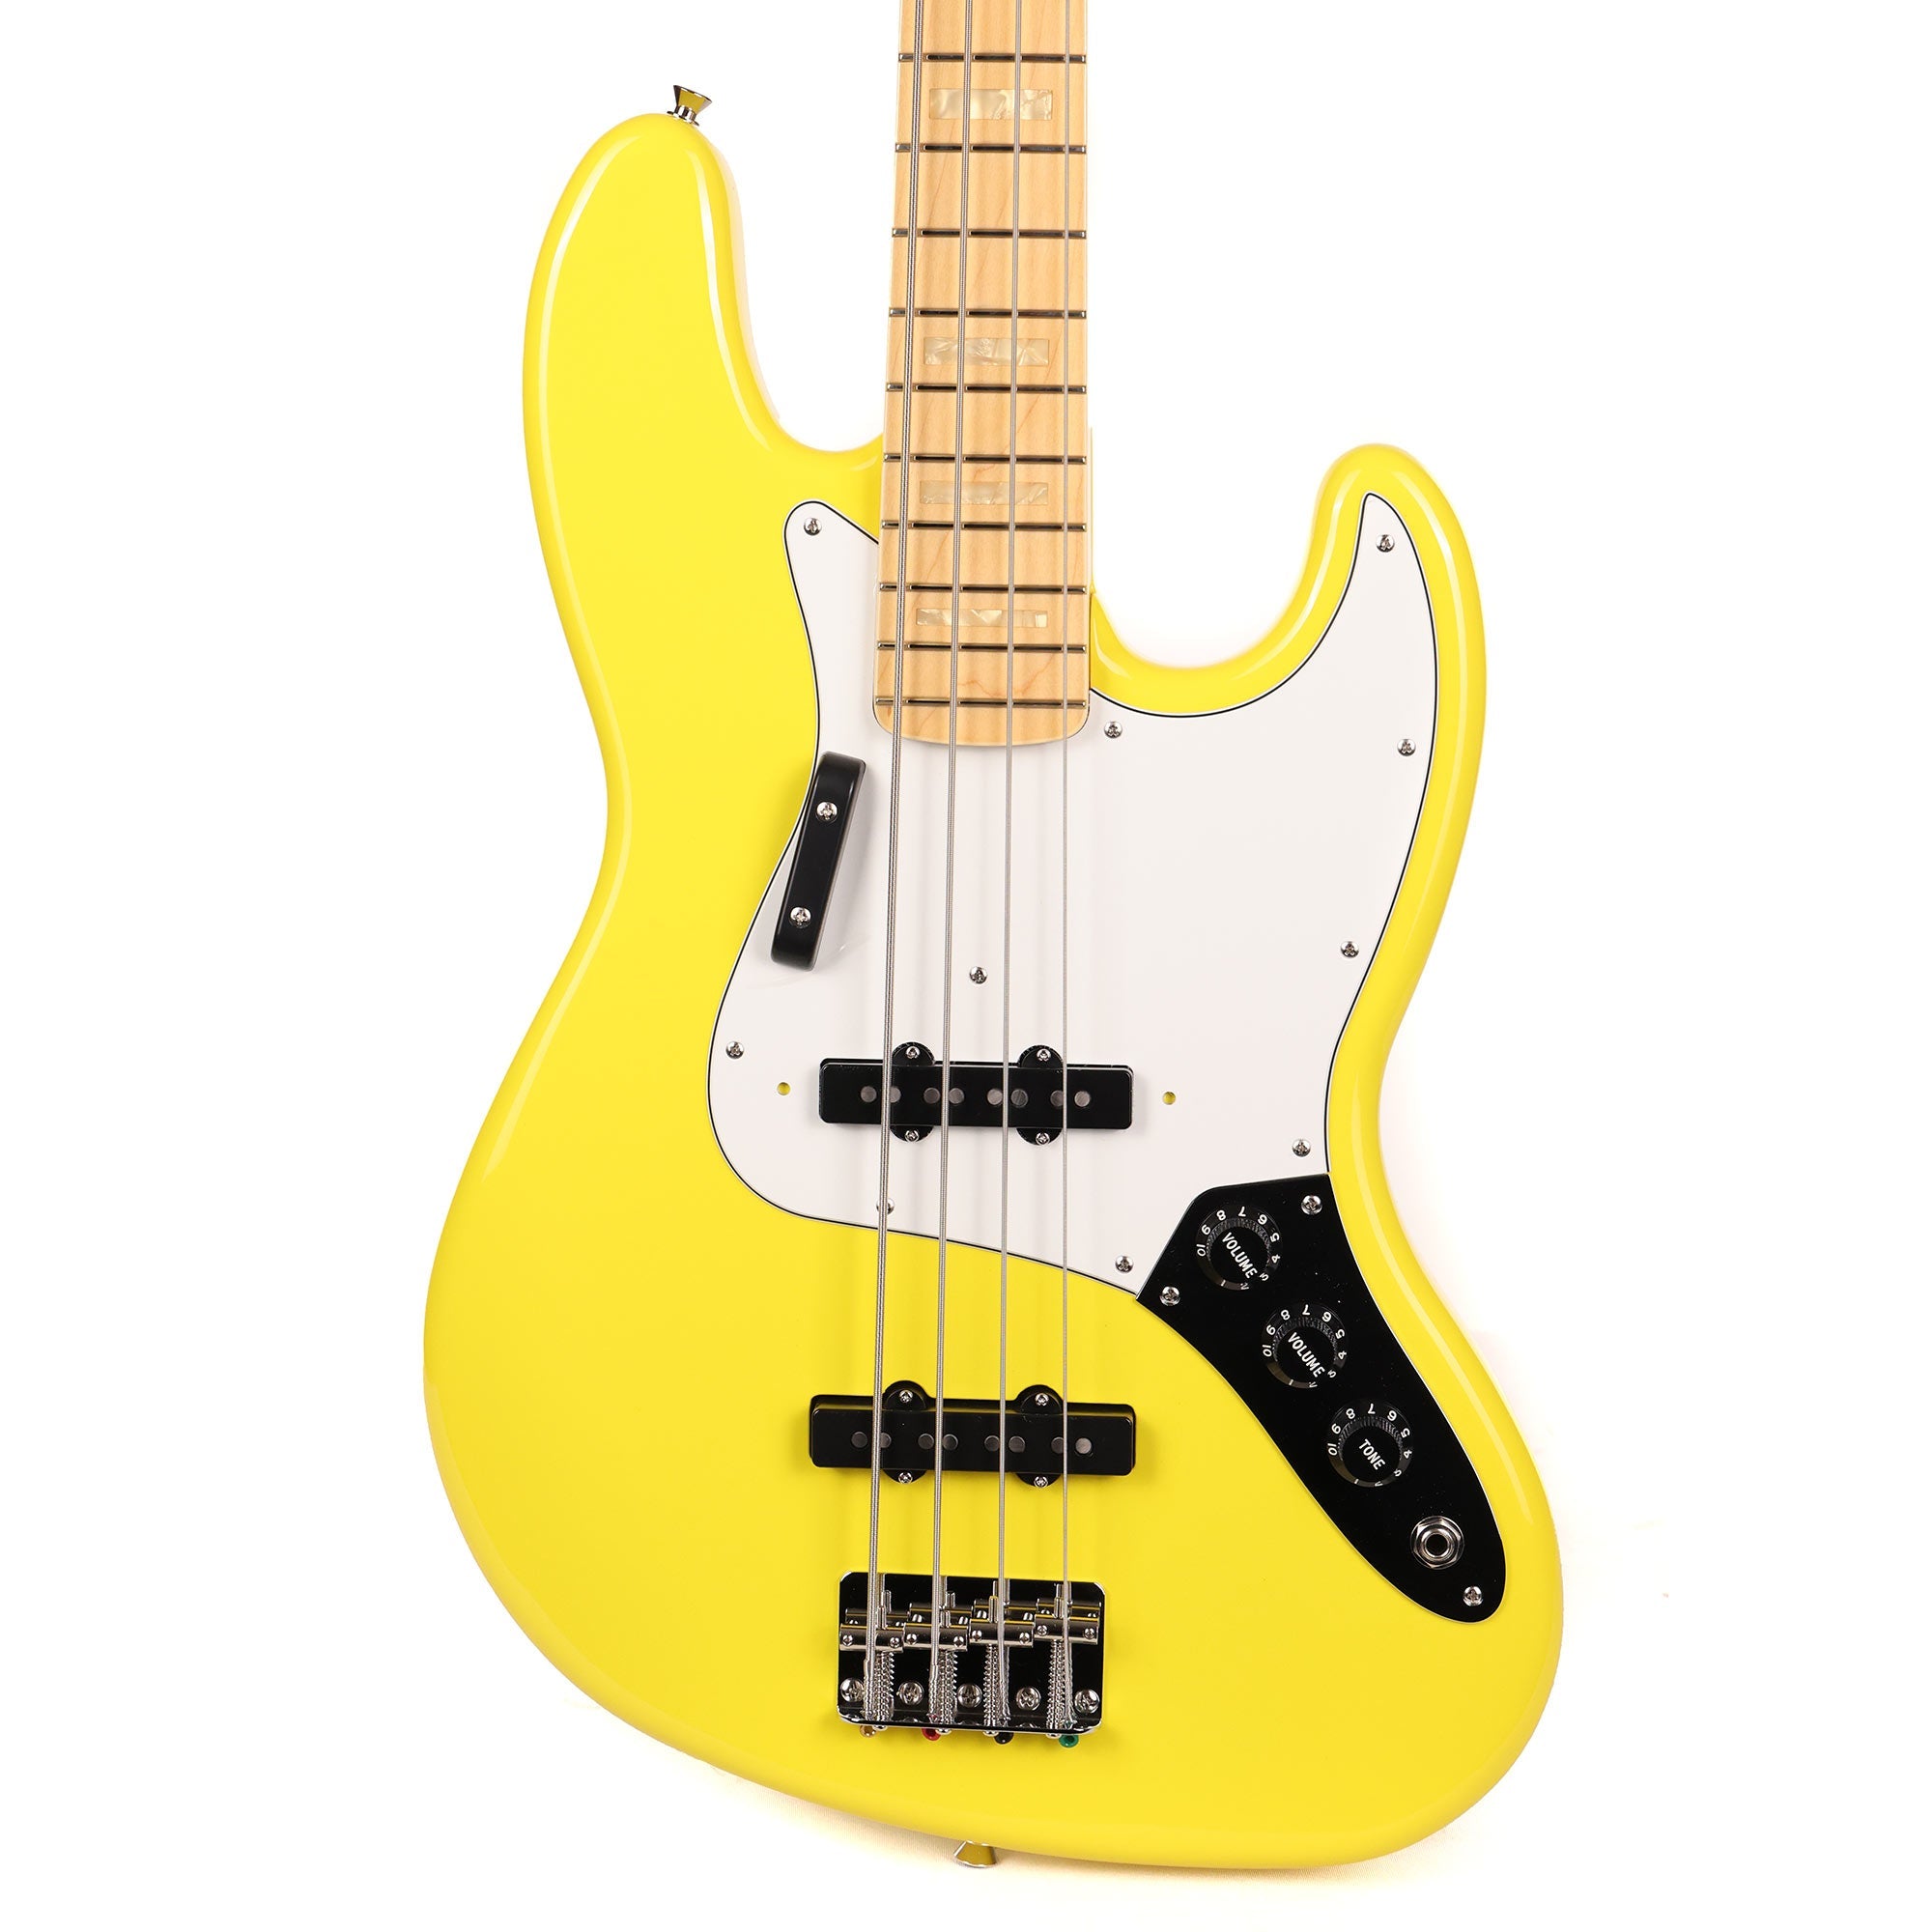 Fender Made in Japan Limited International Color Jazz Bass Monaco